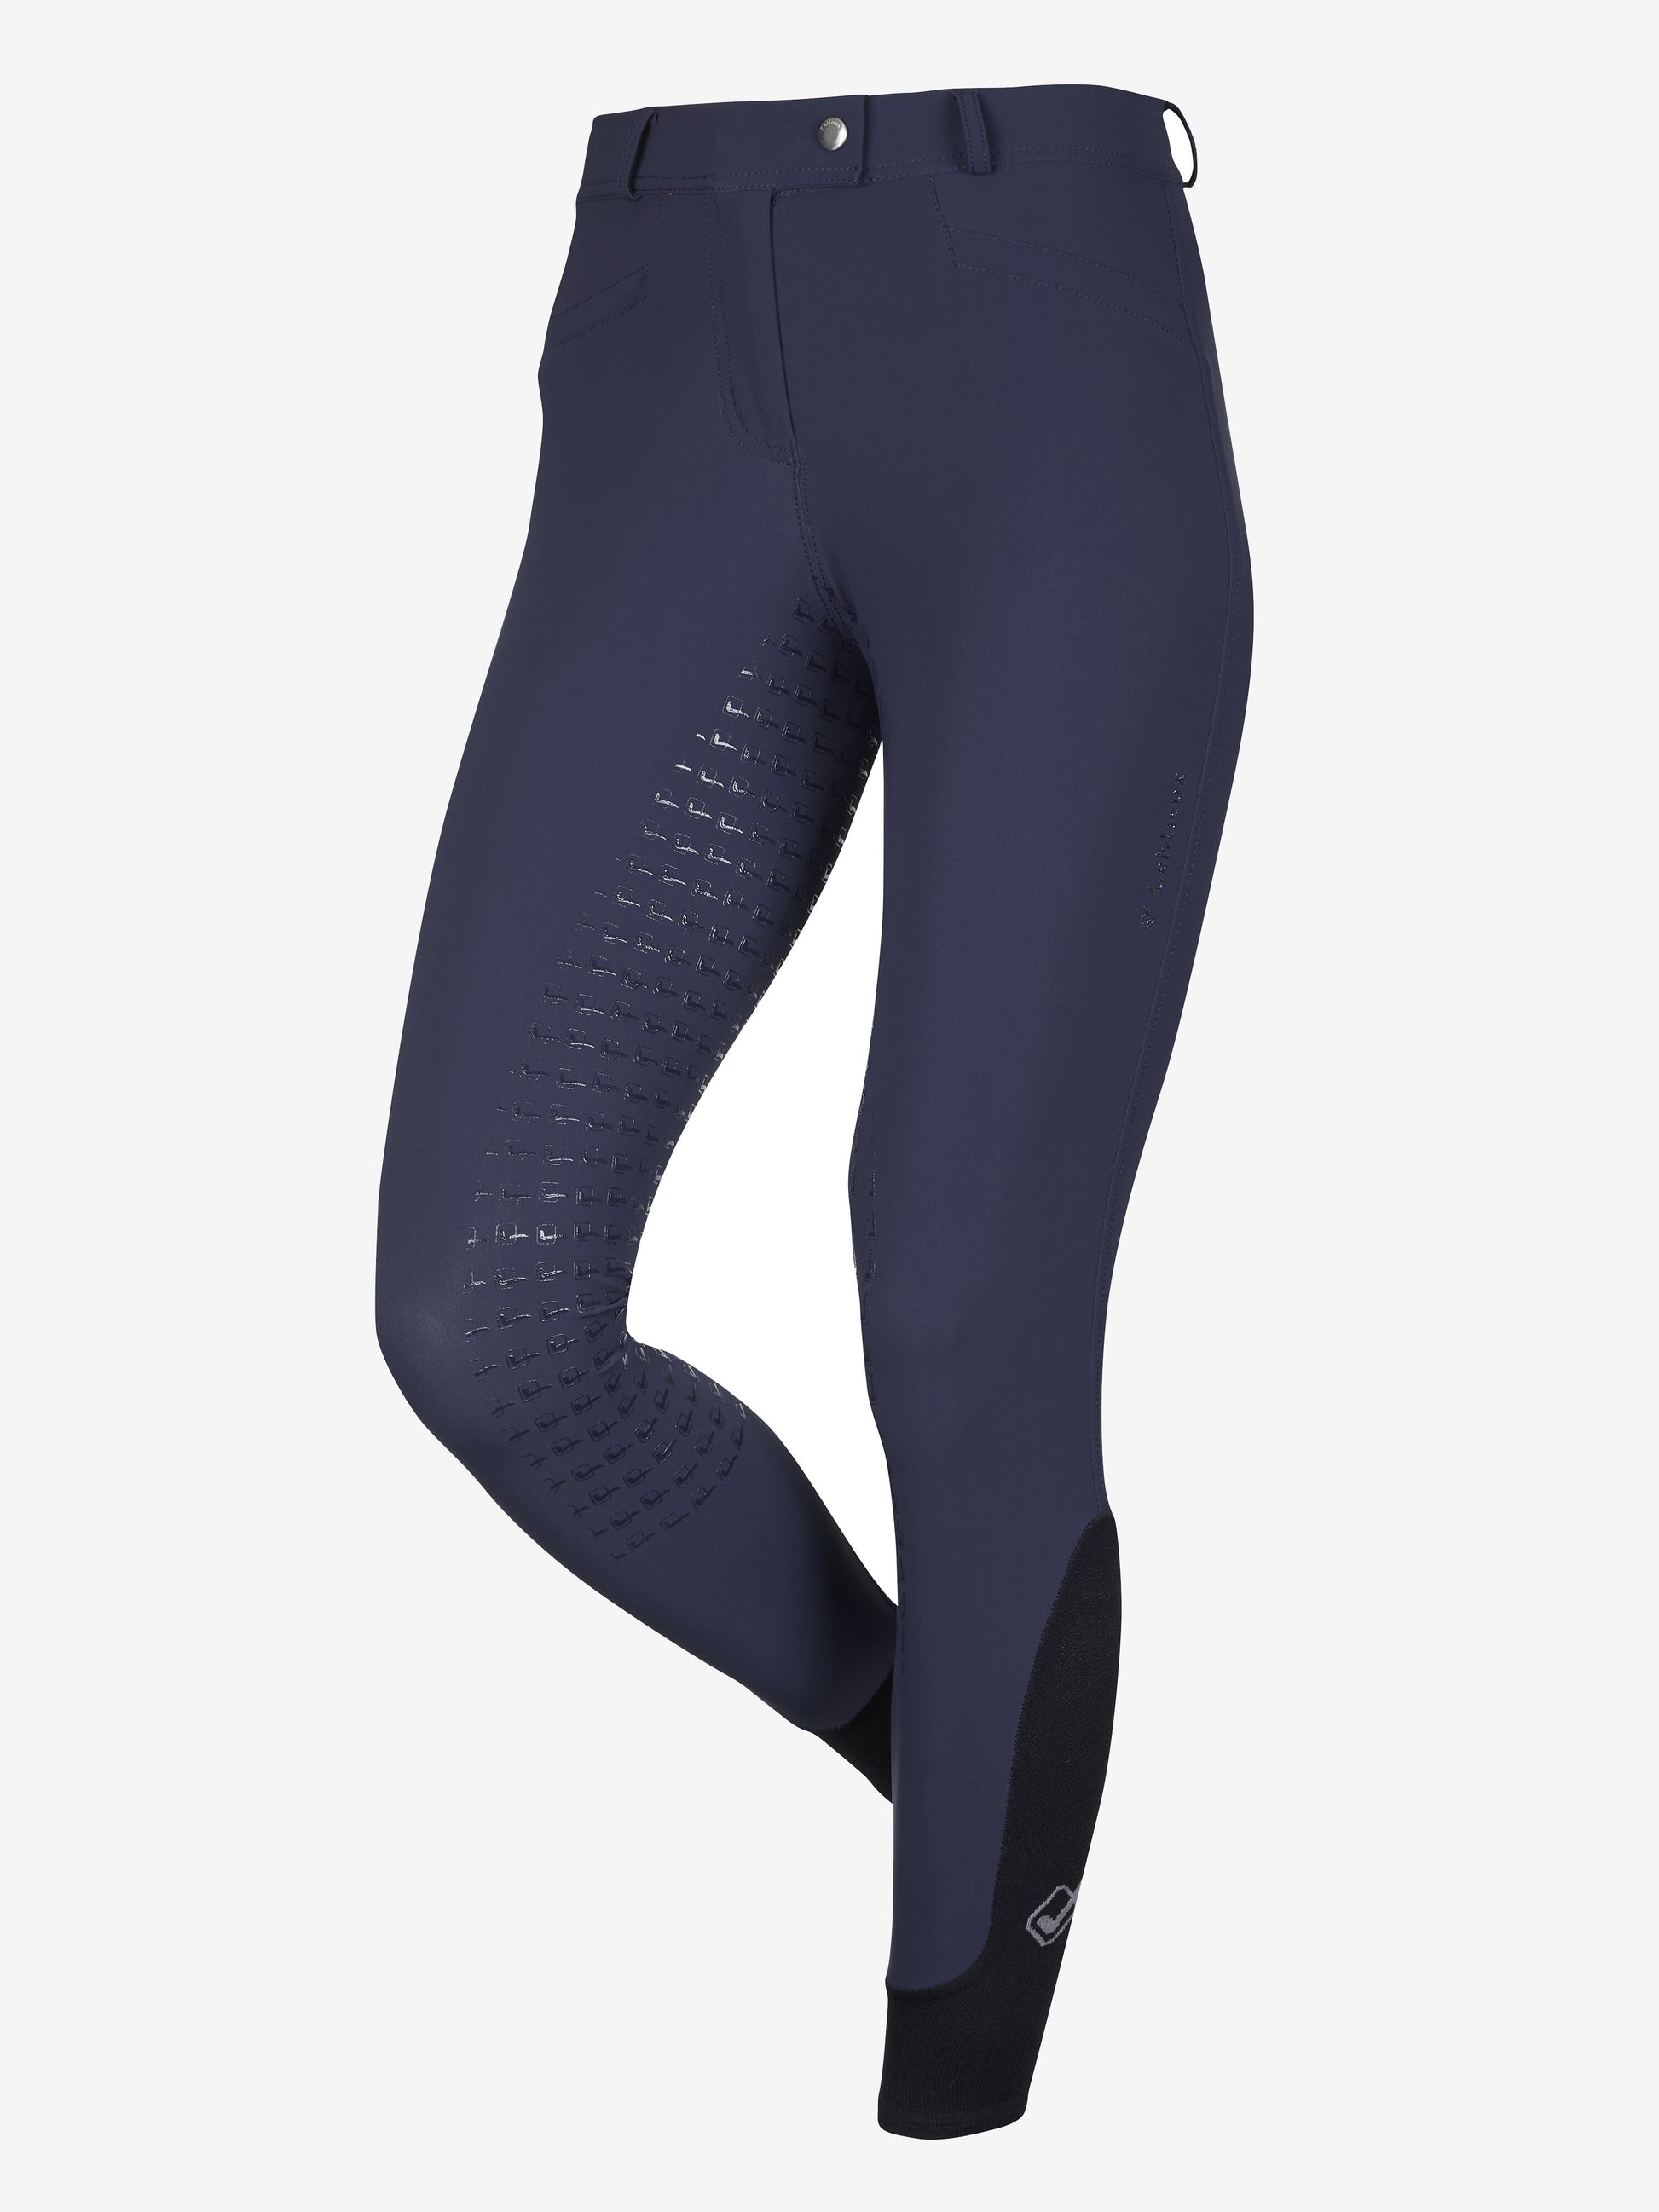 LeMieux Dynamique Full Seat Breeches – The Horse of Course